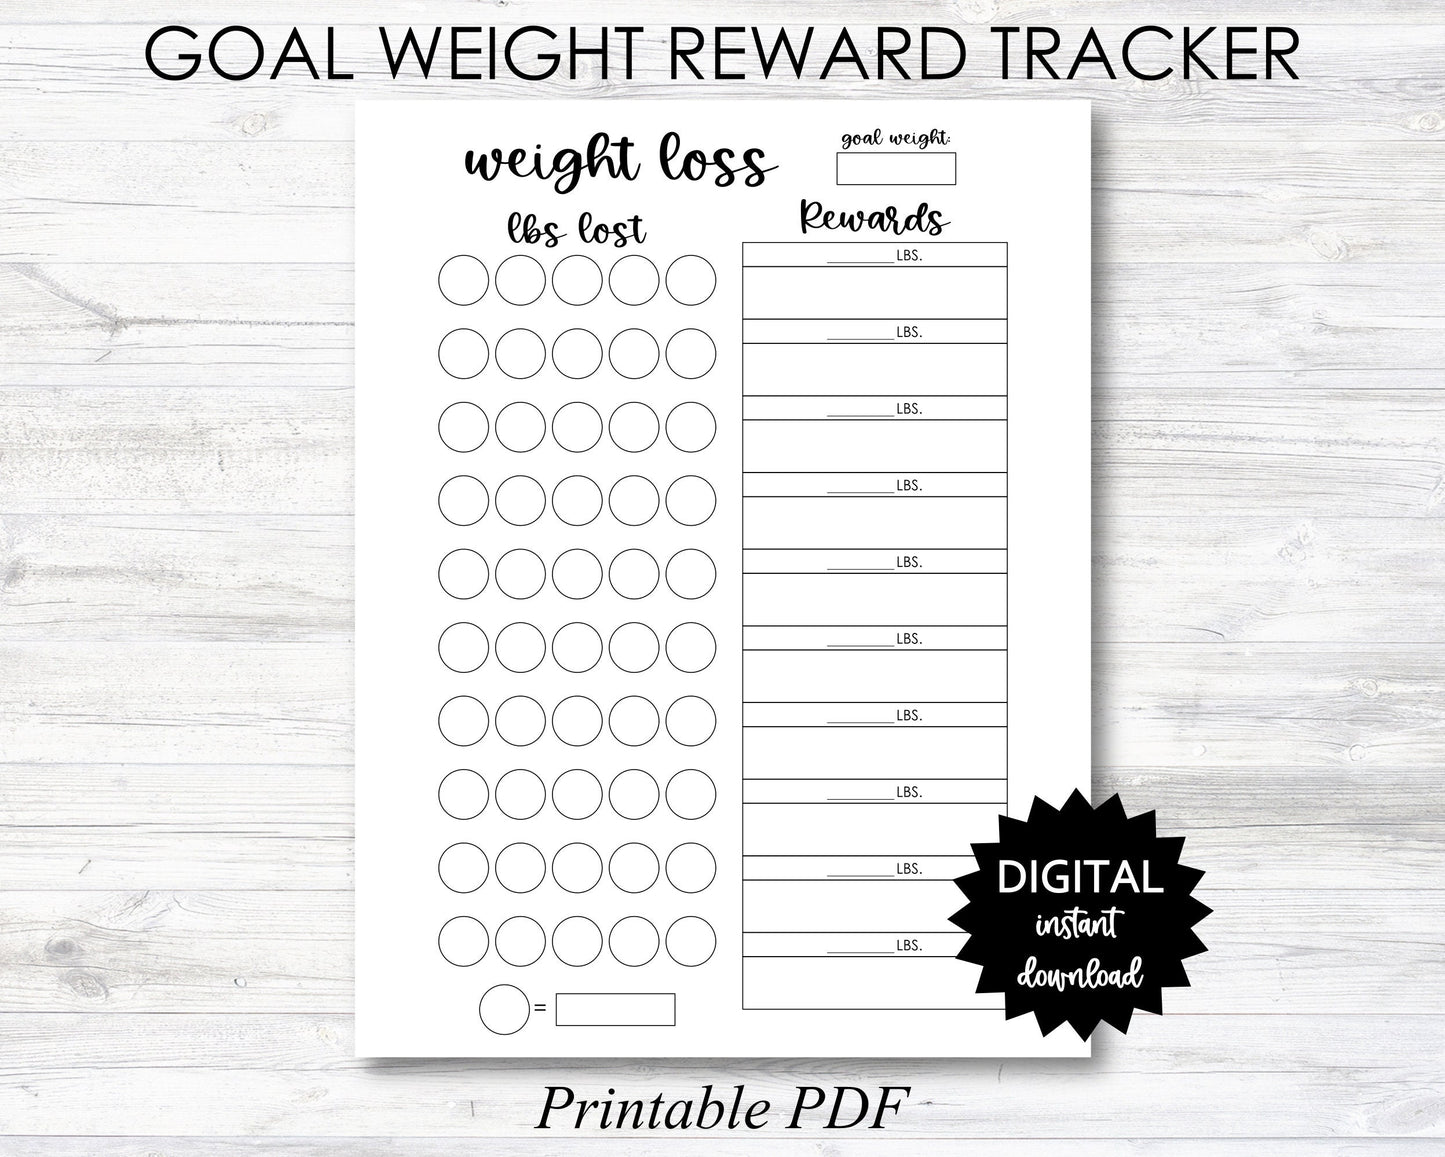 Goal Weight Reward Printable, Weight Loss Reward Tracker, Weight Loss Tracker Digital Download Planner Page - PRINTABLE (N050_2)